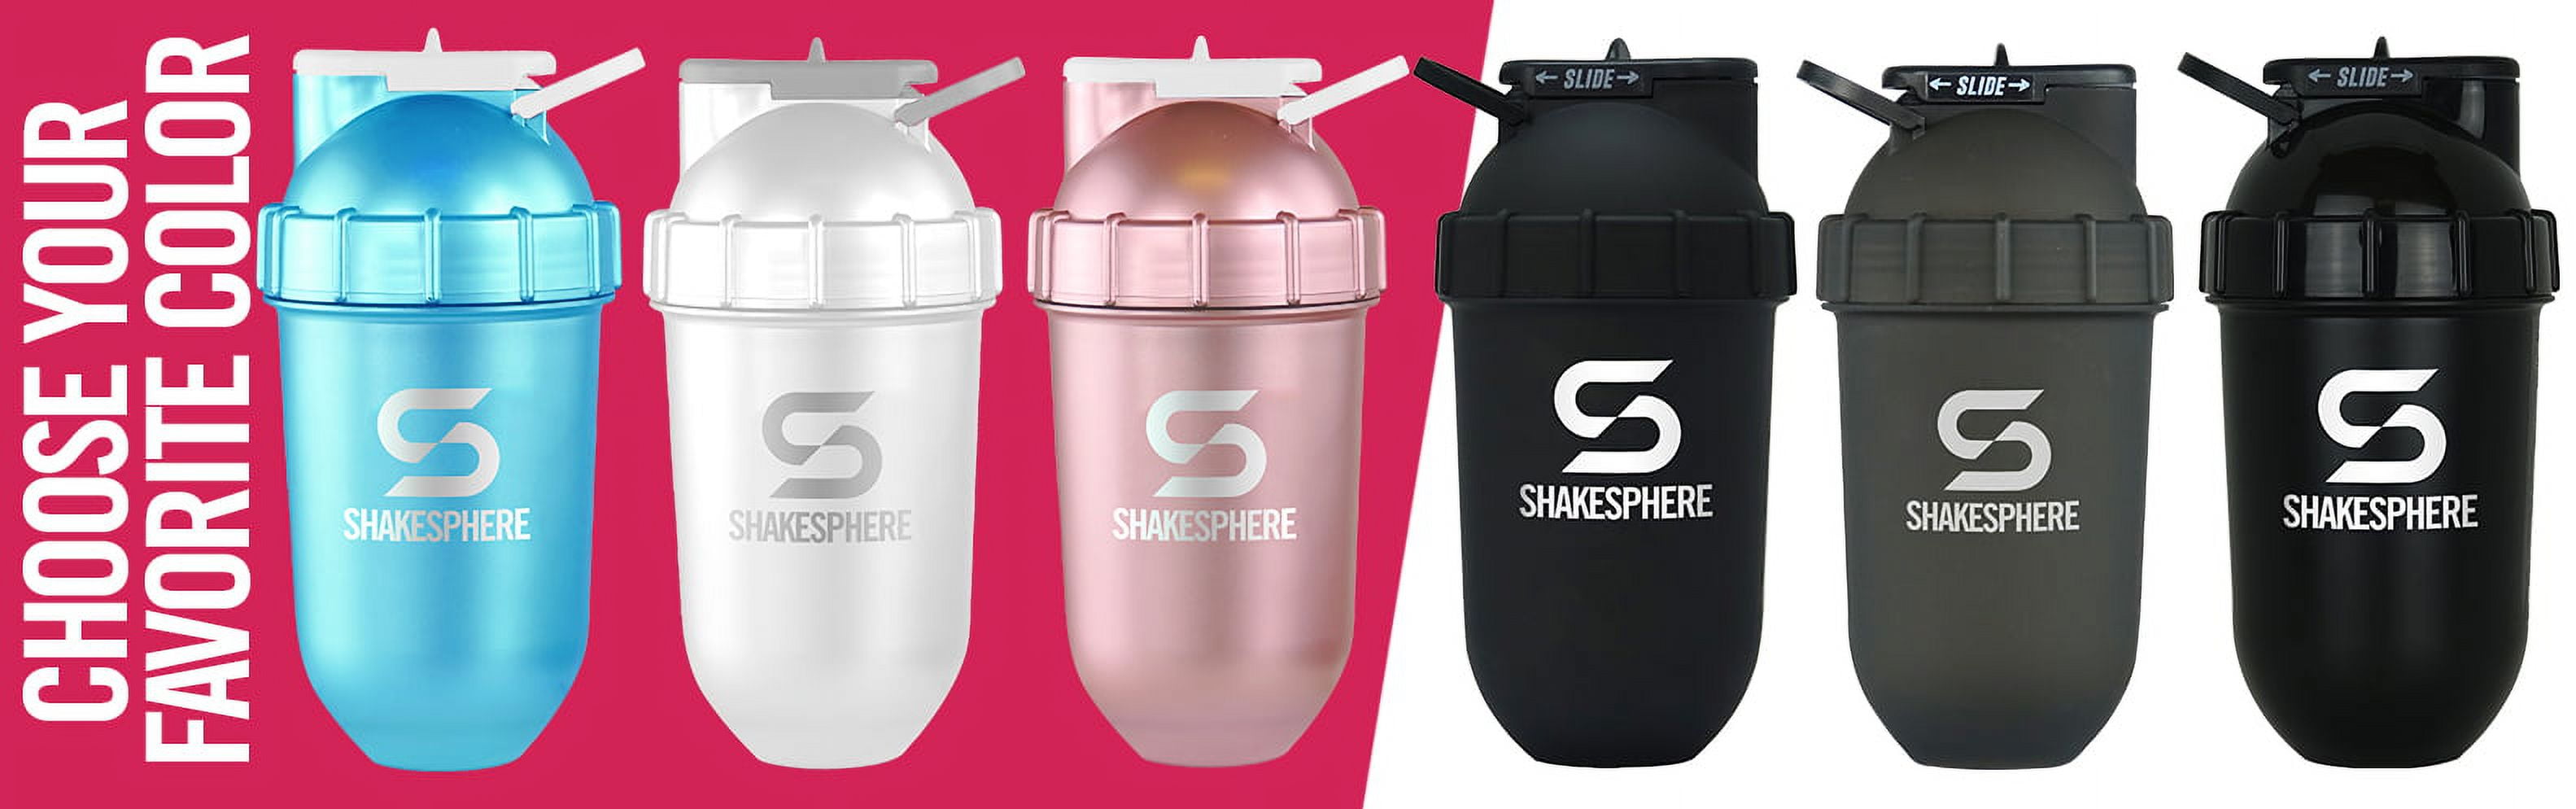 SHAKESPHERE Tumbler: Protein Shaker Bottle and Smoothie Cup, 24 oz -  Bladeless Blender Cup Purees Ra…See more SHAKESPHERE Tumbler: Protein  Shaker